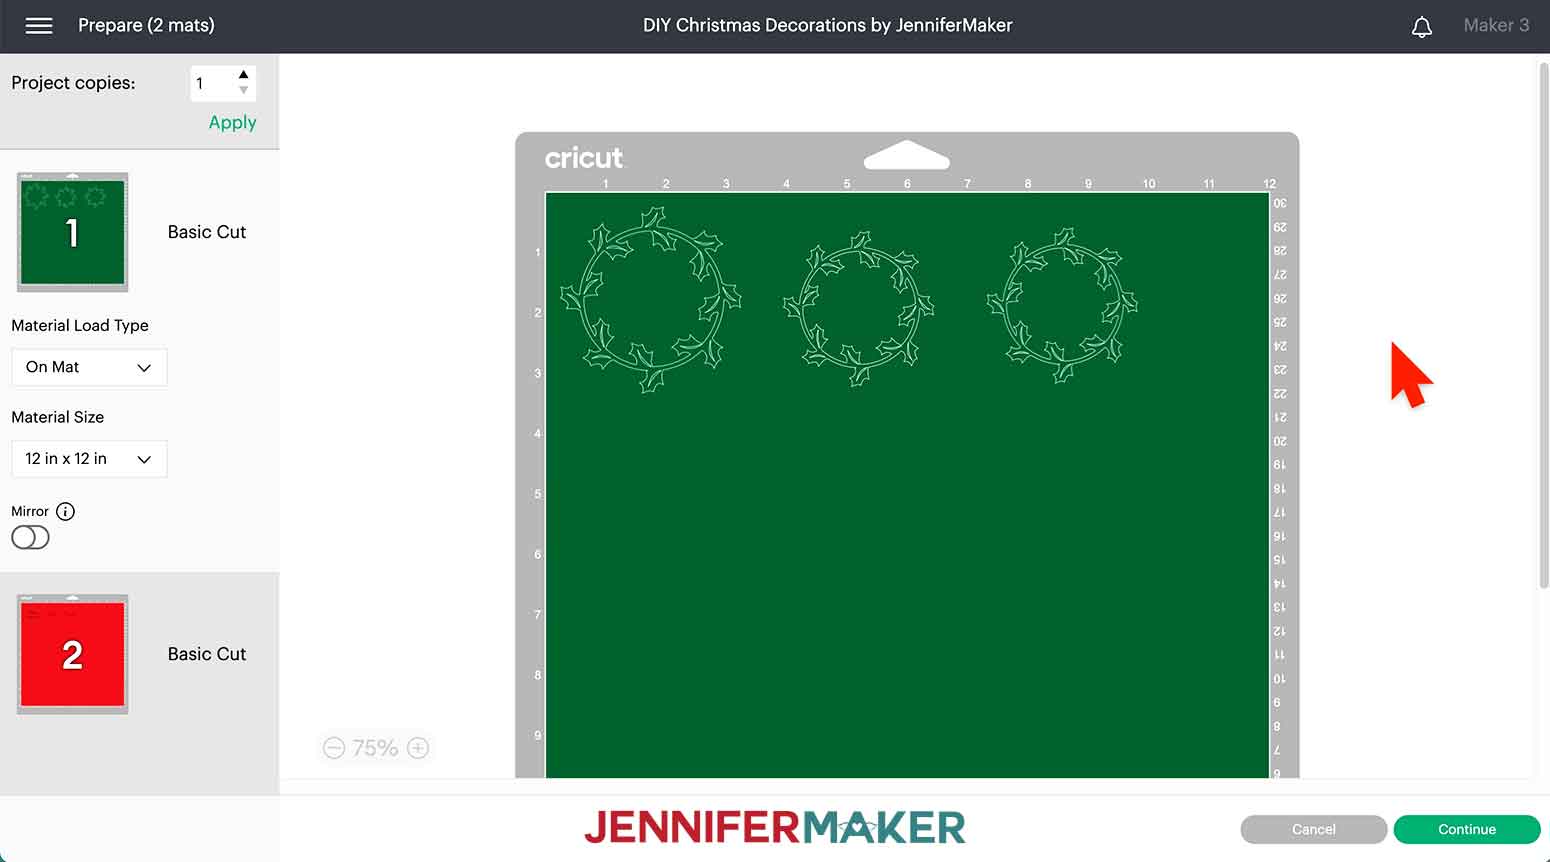 Wreath design spaced out on Prepare screen to allow room for weeding each design.